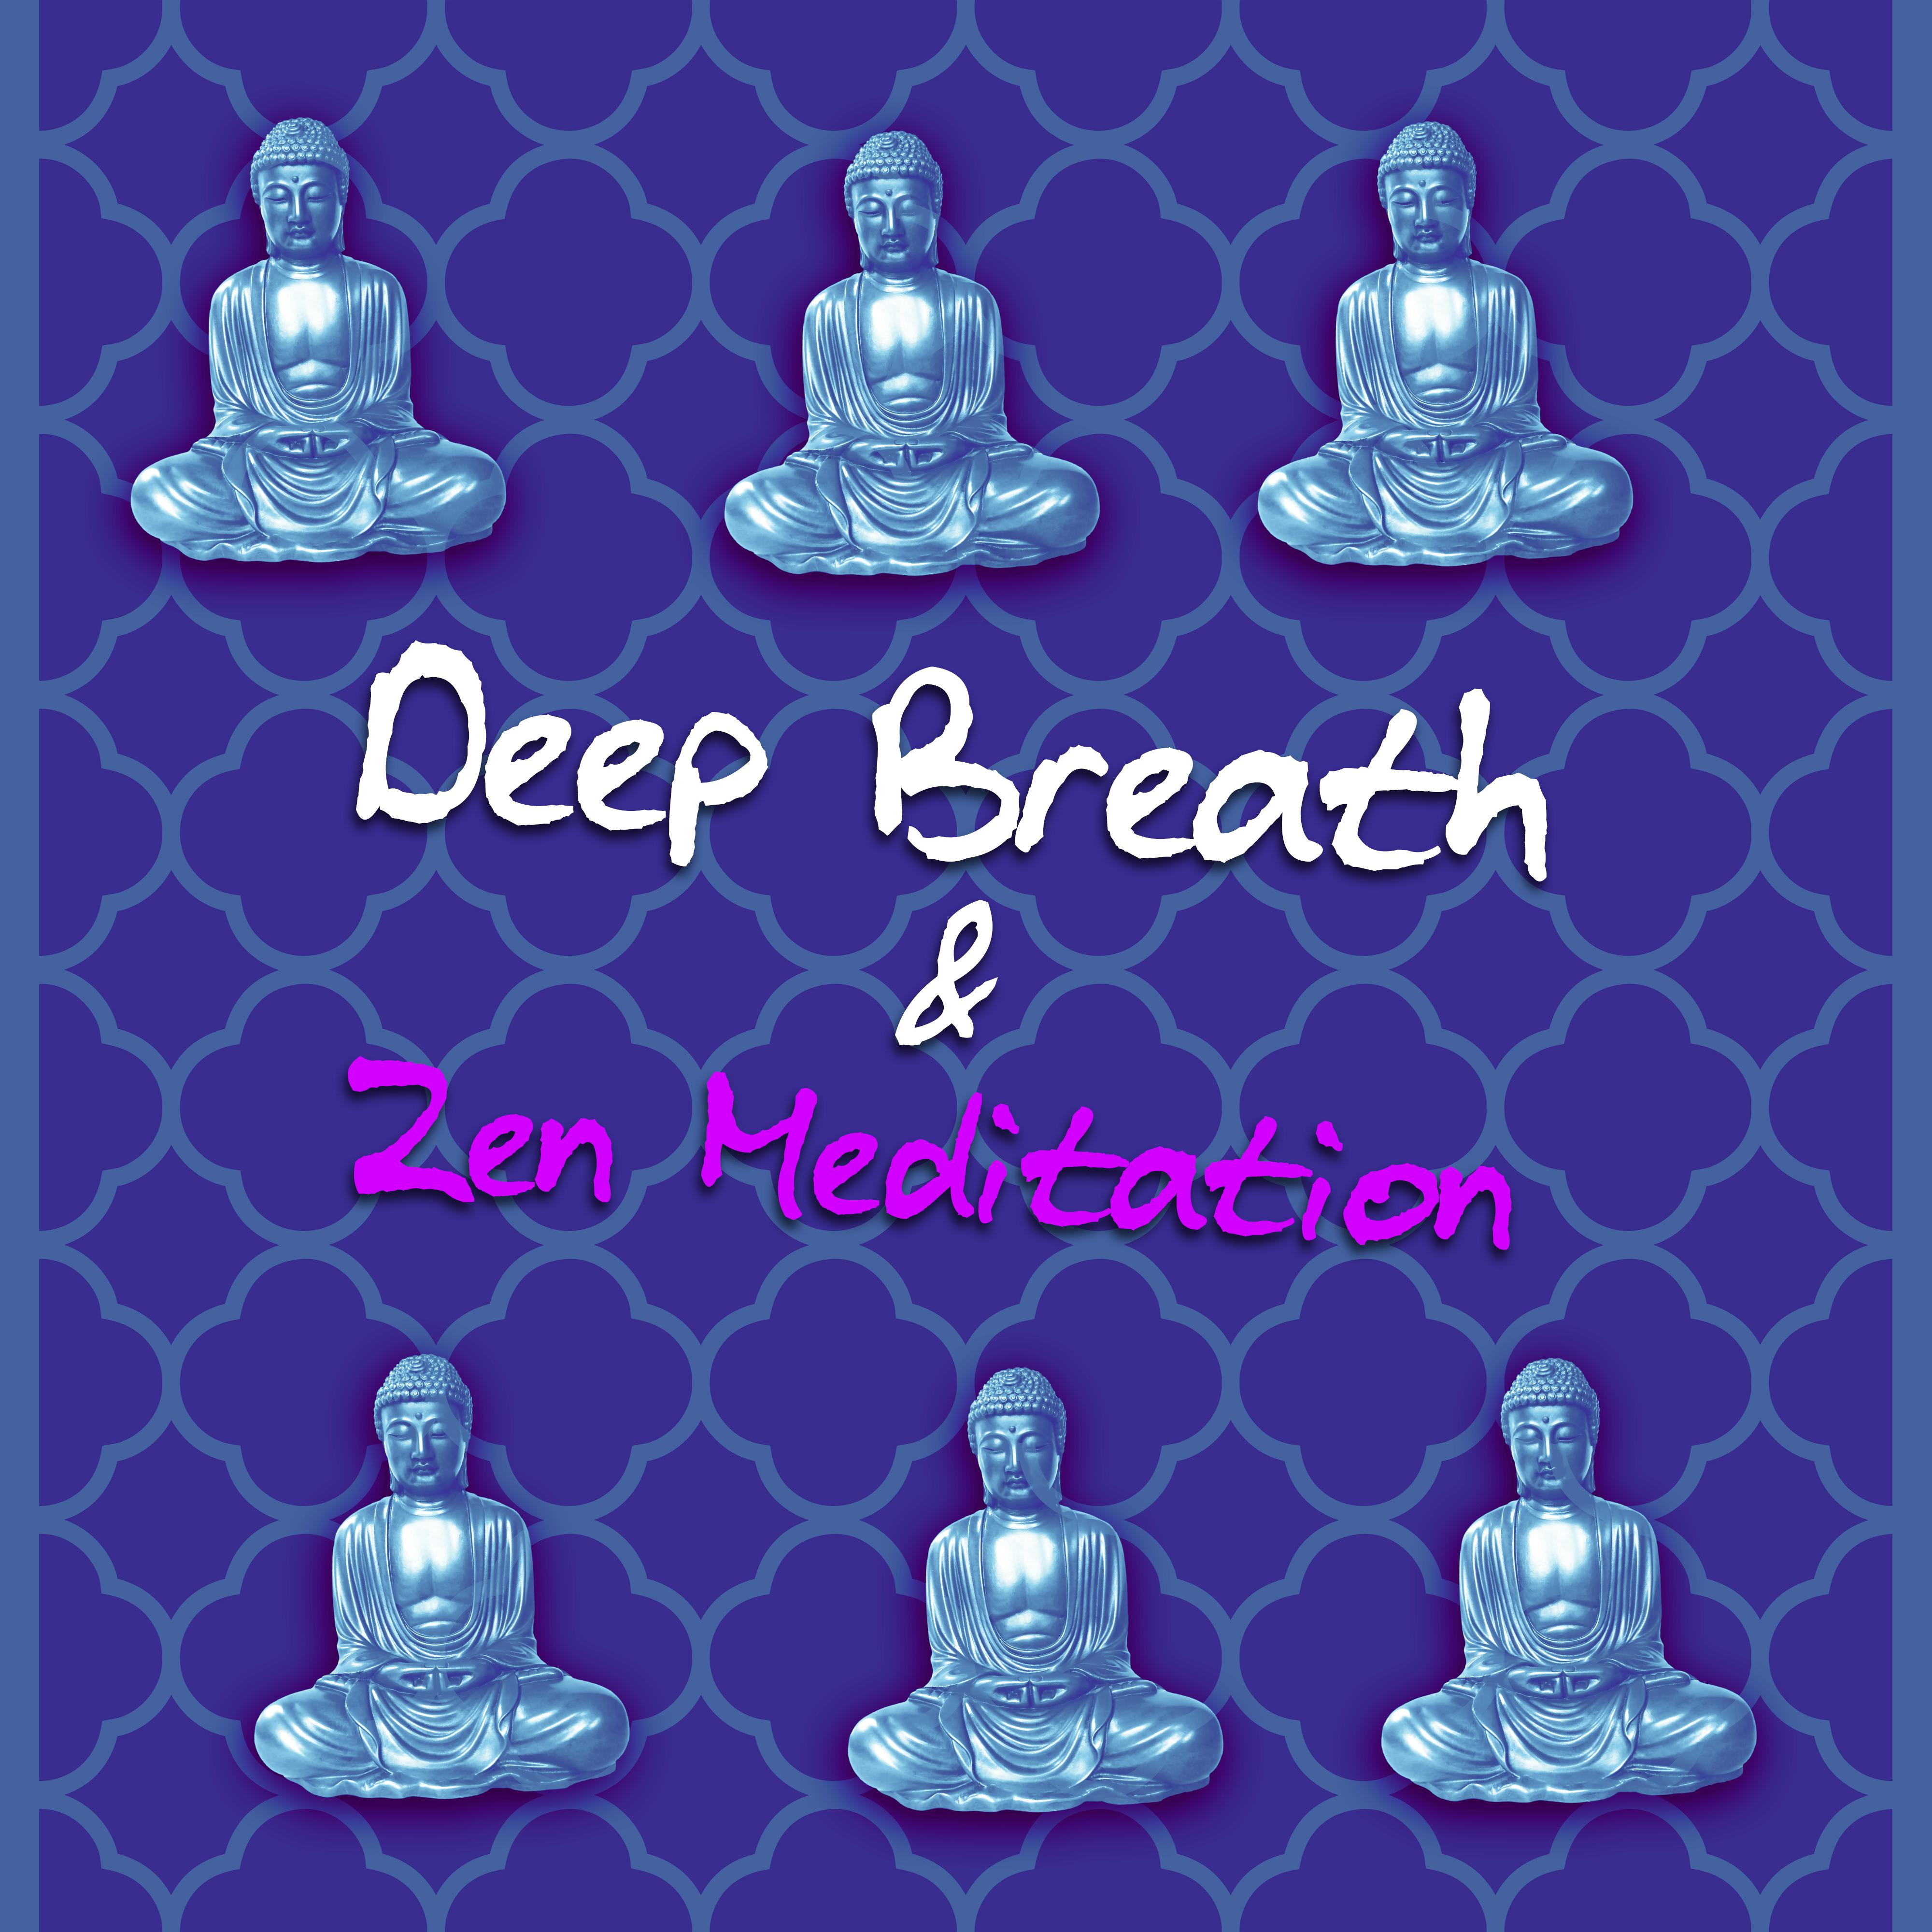 Deep Breath  Zen Meditation  Relaxation Mind Music for Good Night, Sleeping and Dreaming, Mindfulness Meditation Song